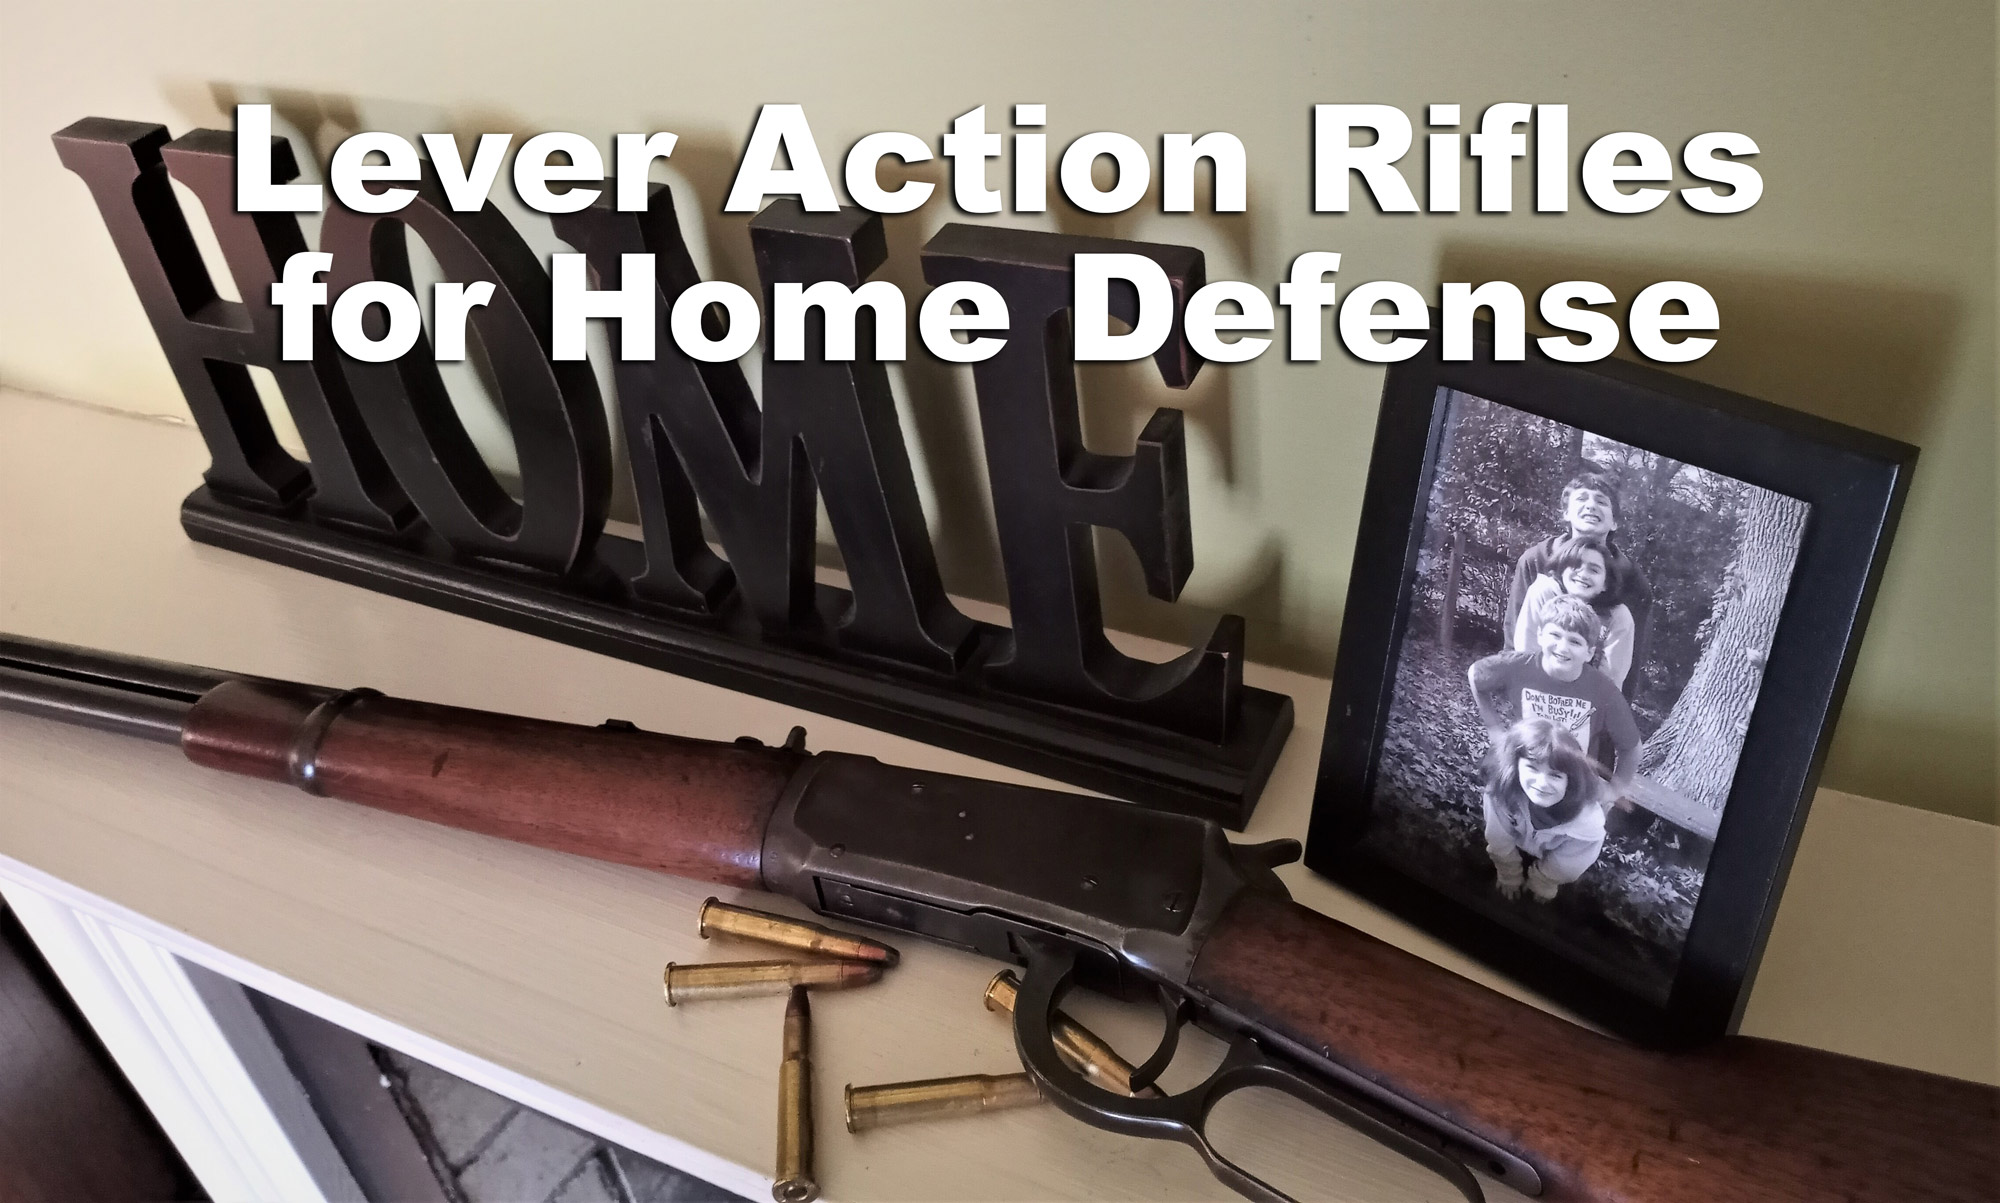 Lever action rifle for home defense on a mantle